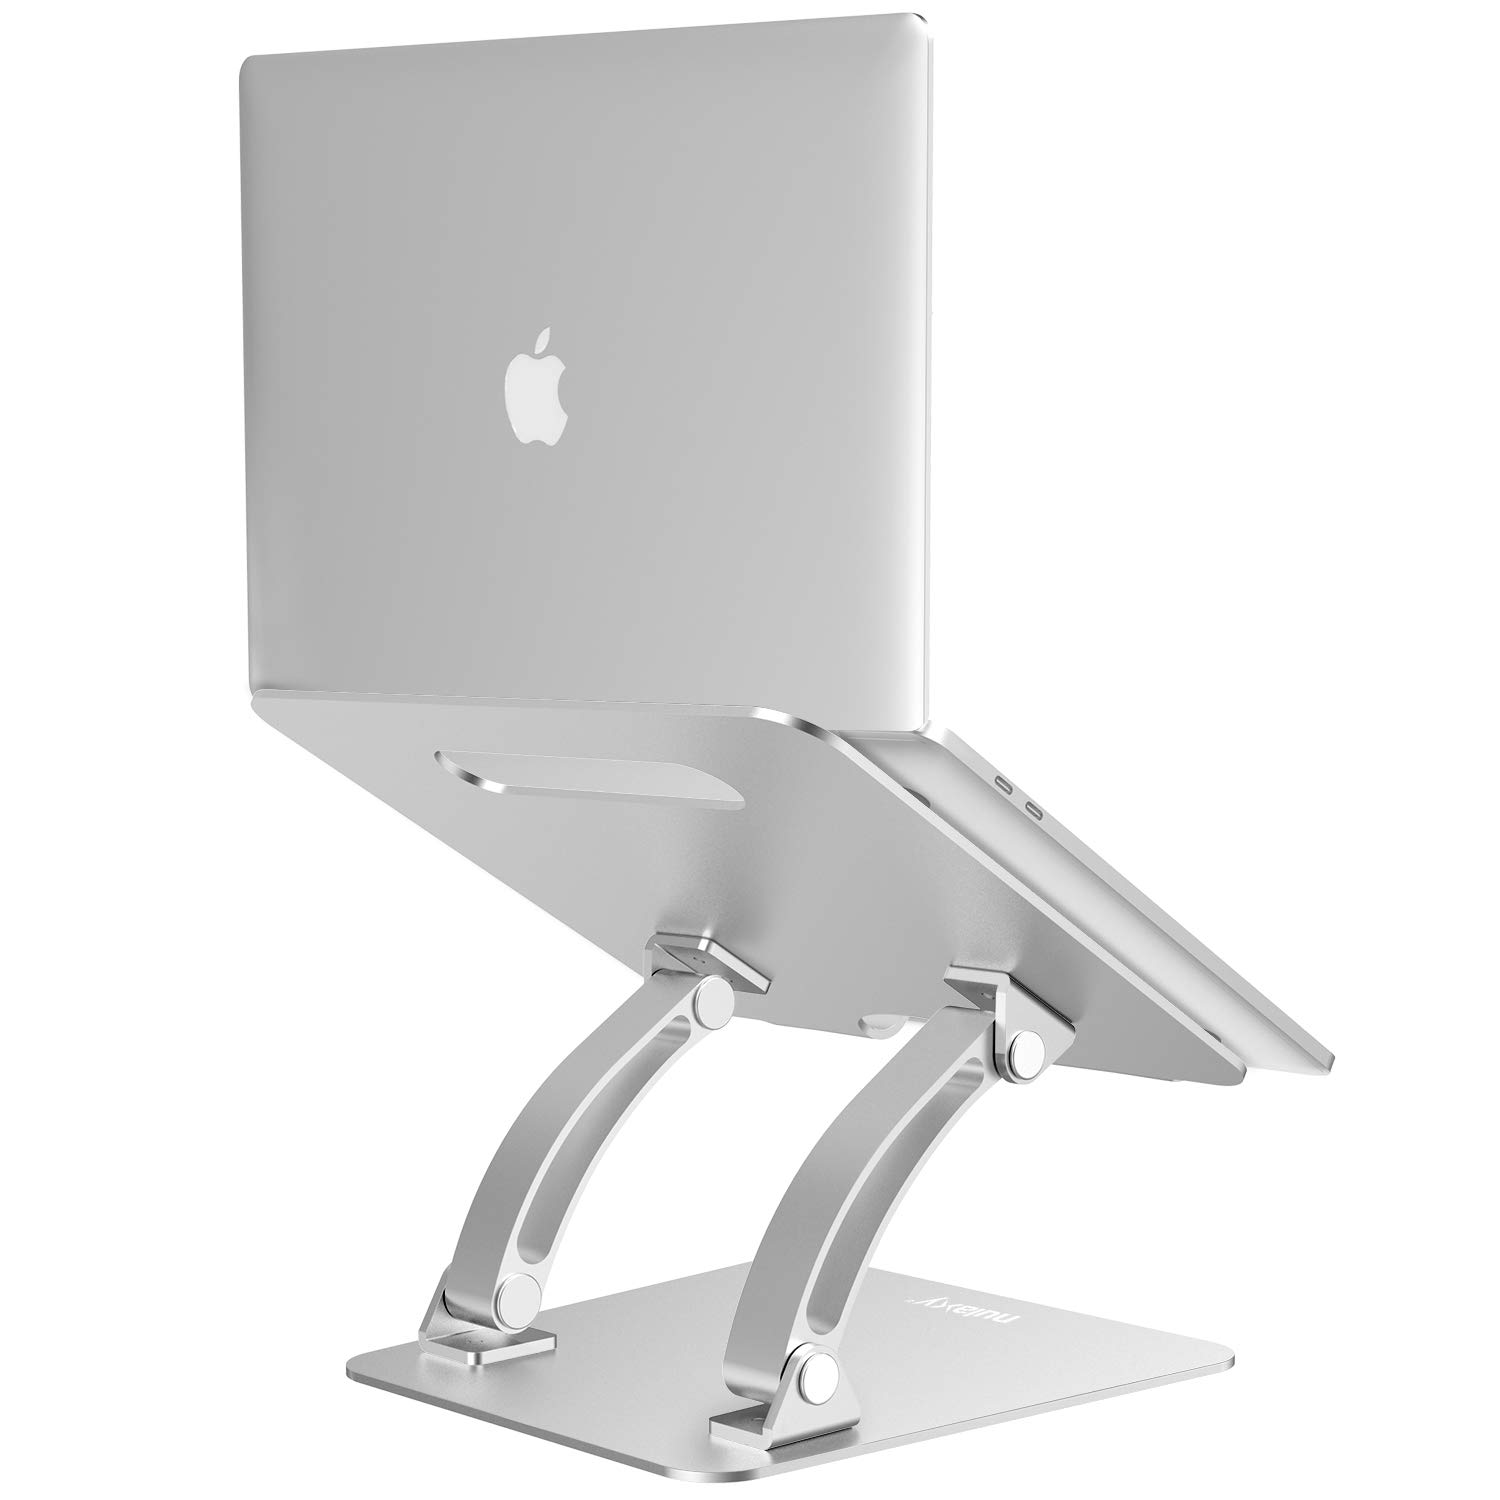 Nulaxy Laptop Stand, Ergonomic Adjustable Laptop Riser Computer Laptop Stand Compatible with Apple MacBook, Air, Pro, Dell XPS, HP, Samsung, Lenovo, All Laptops 10-17.3", Supports Up to 22 Lbs -Silver